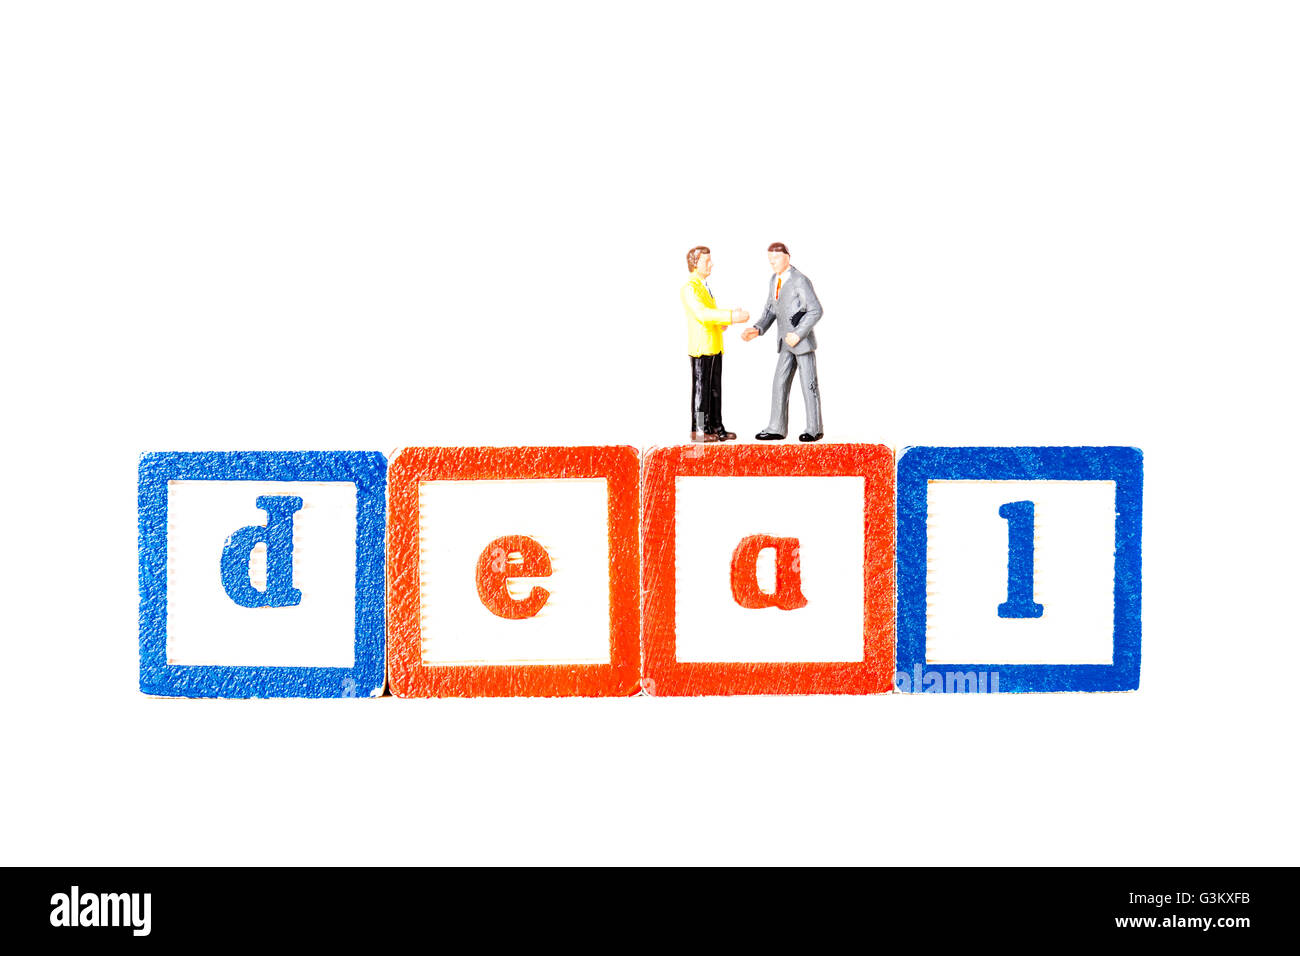 deal dealings men agreeing business man shaking hands deals done buying selling Cutout cut out white background isolated Stock Photo